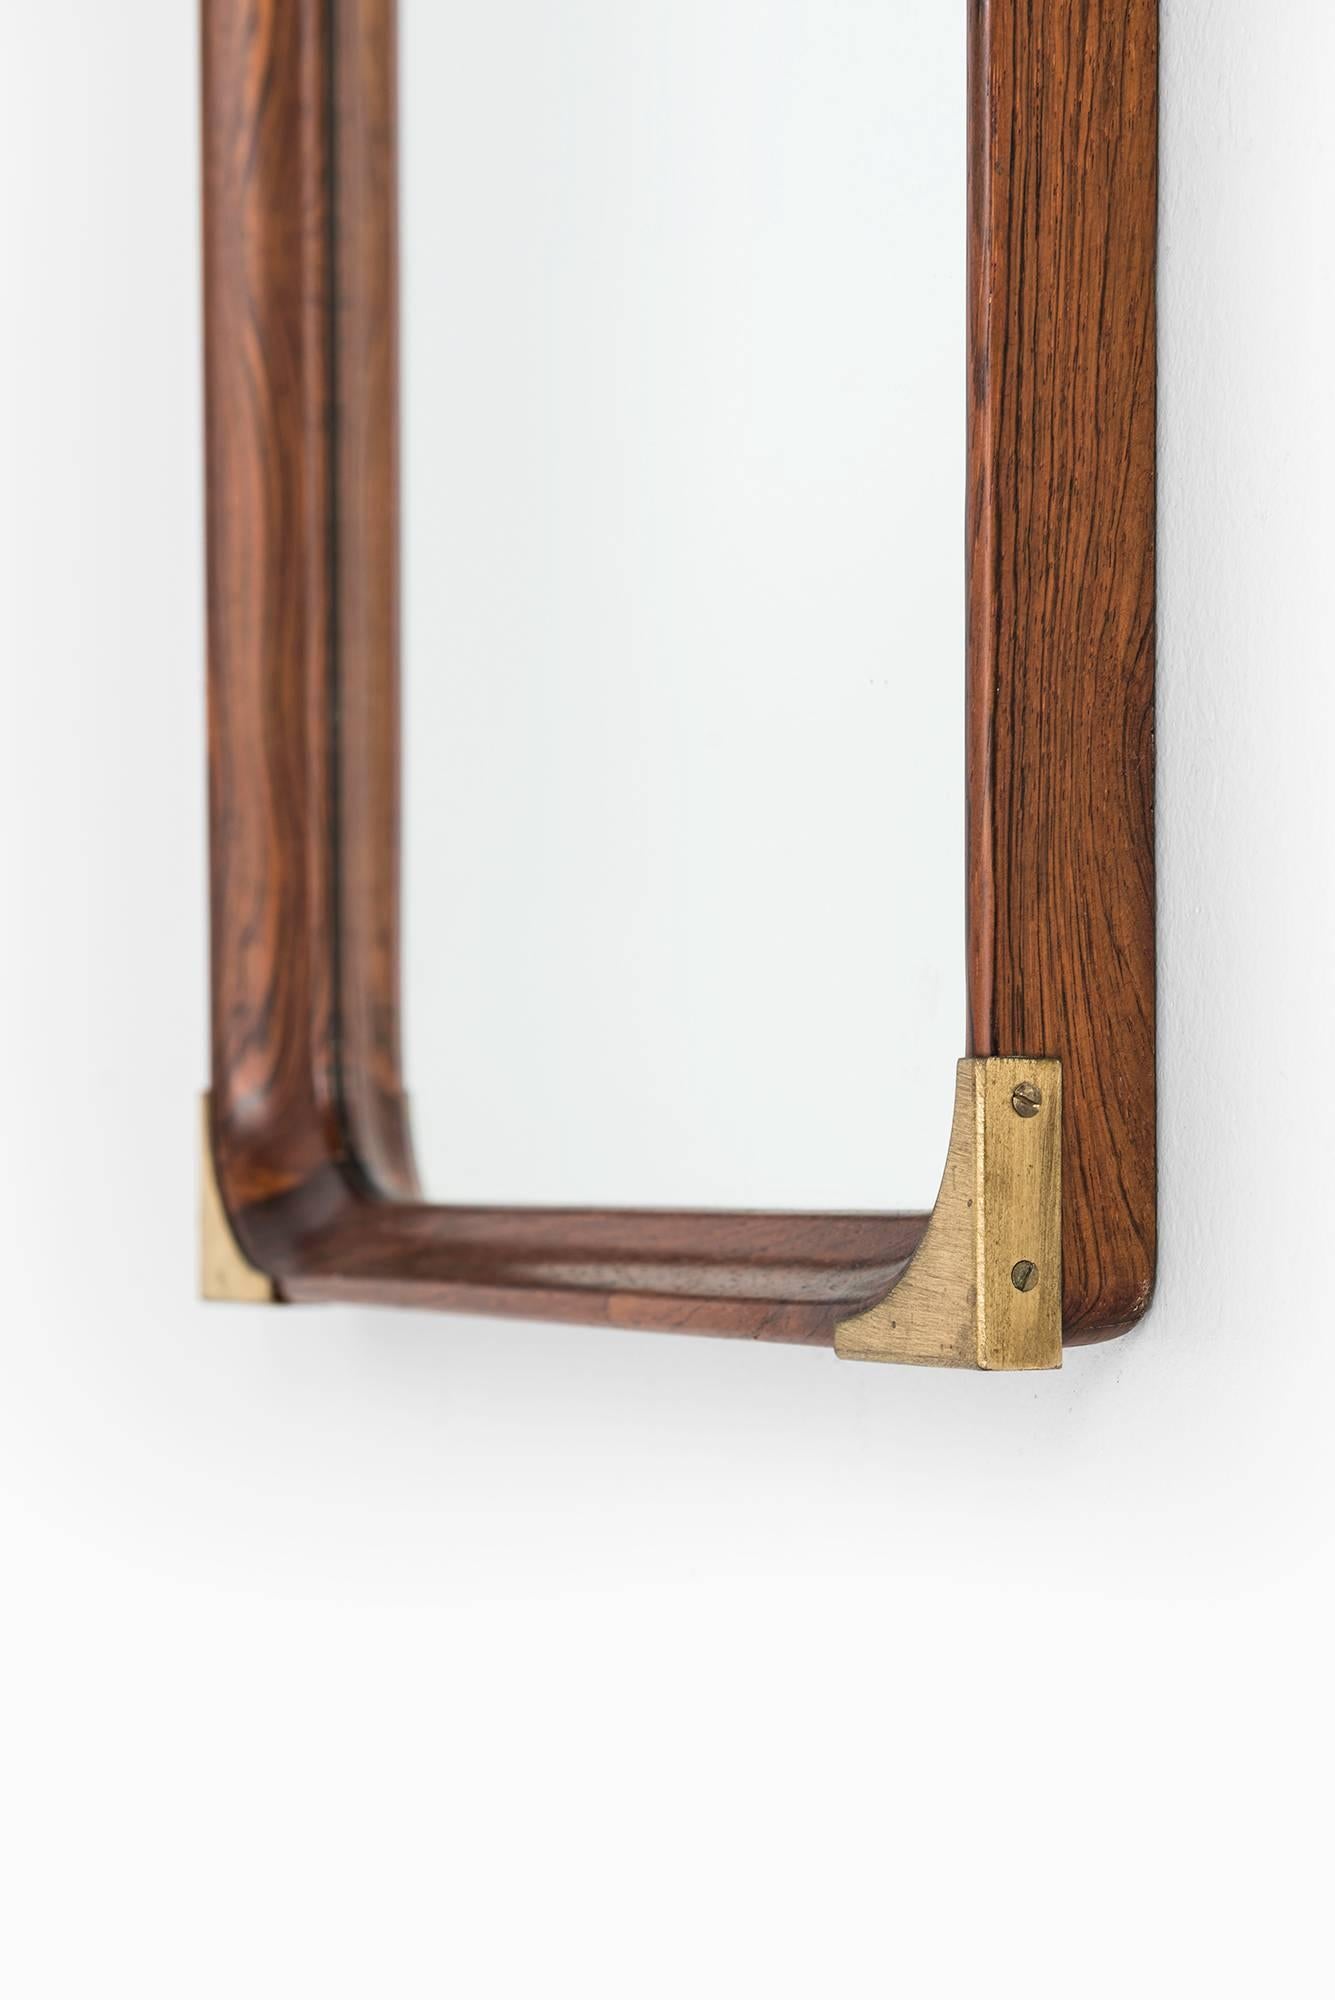 Rare mirror in rosewood with brass details. Produced in Sweden.